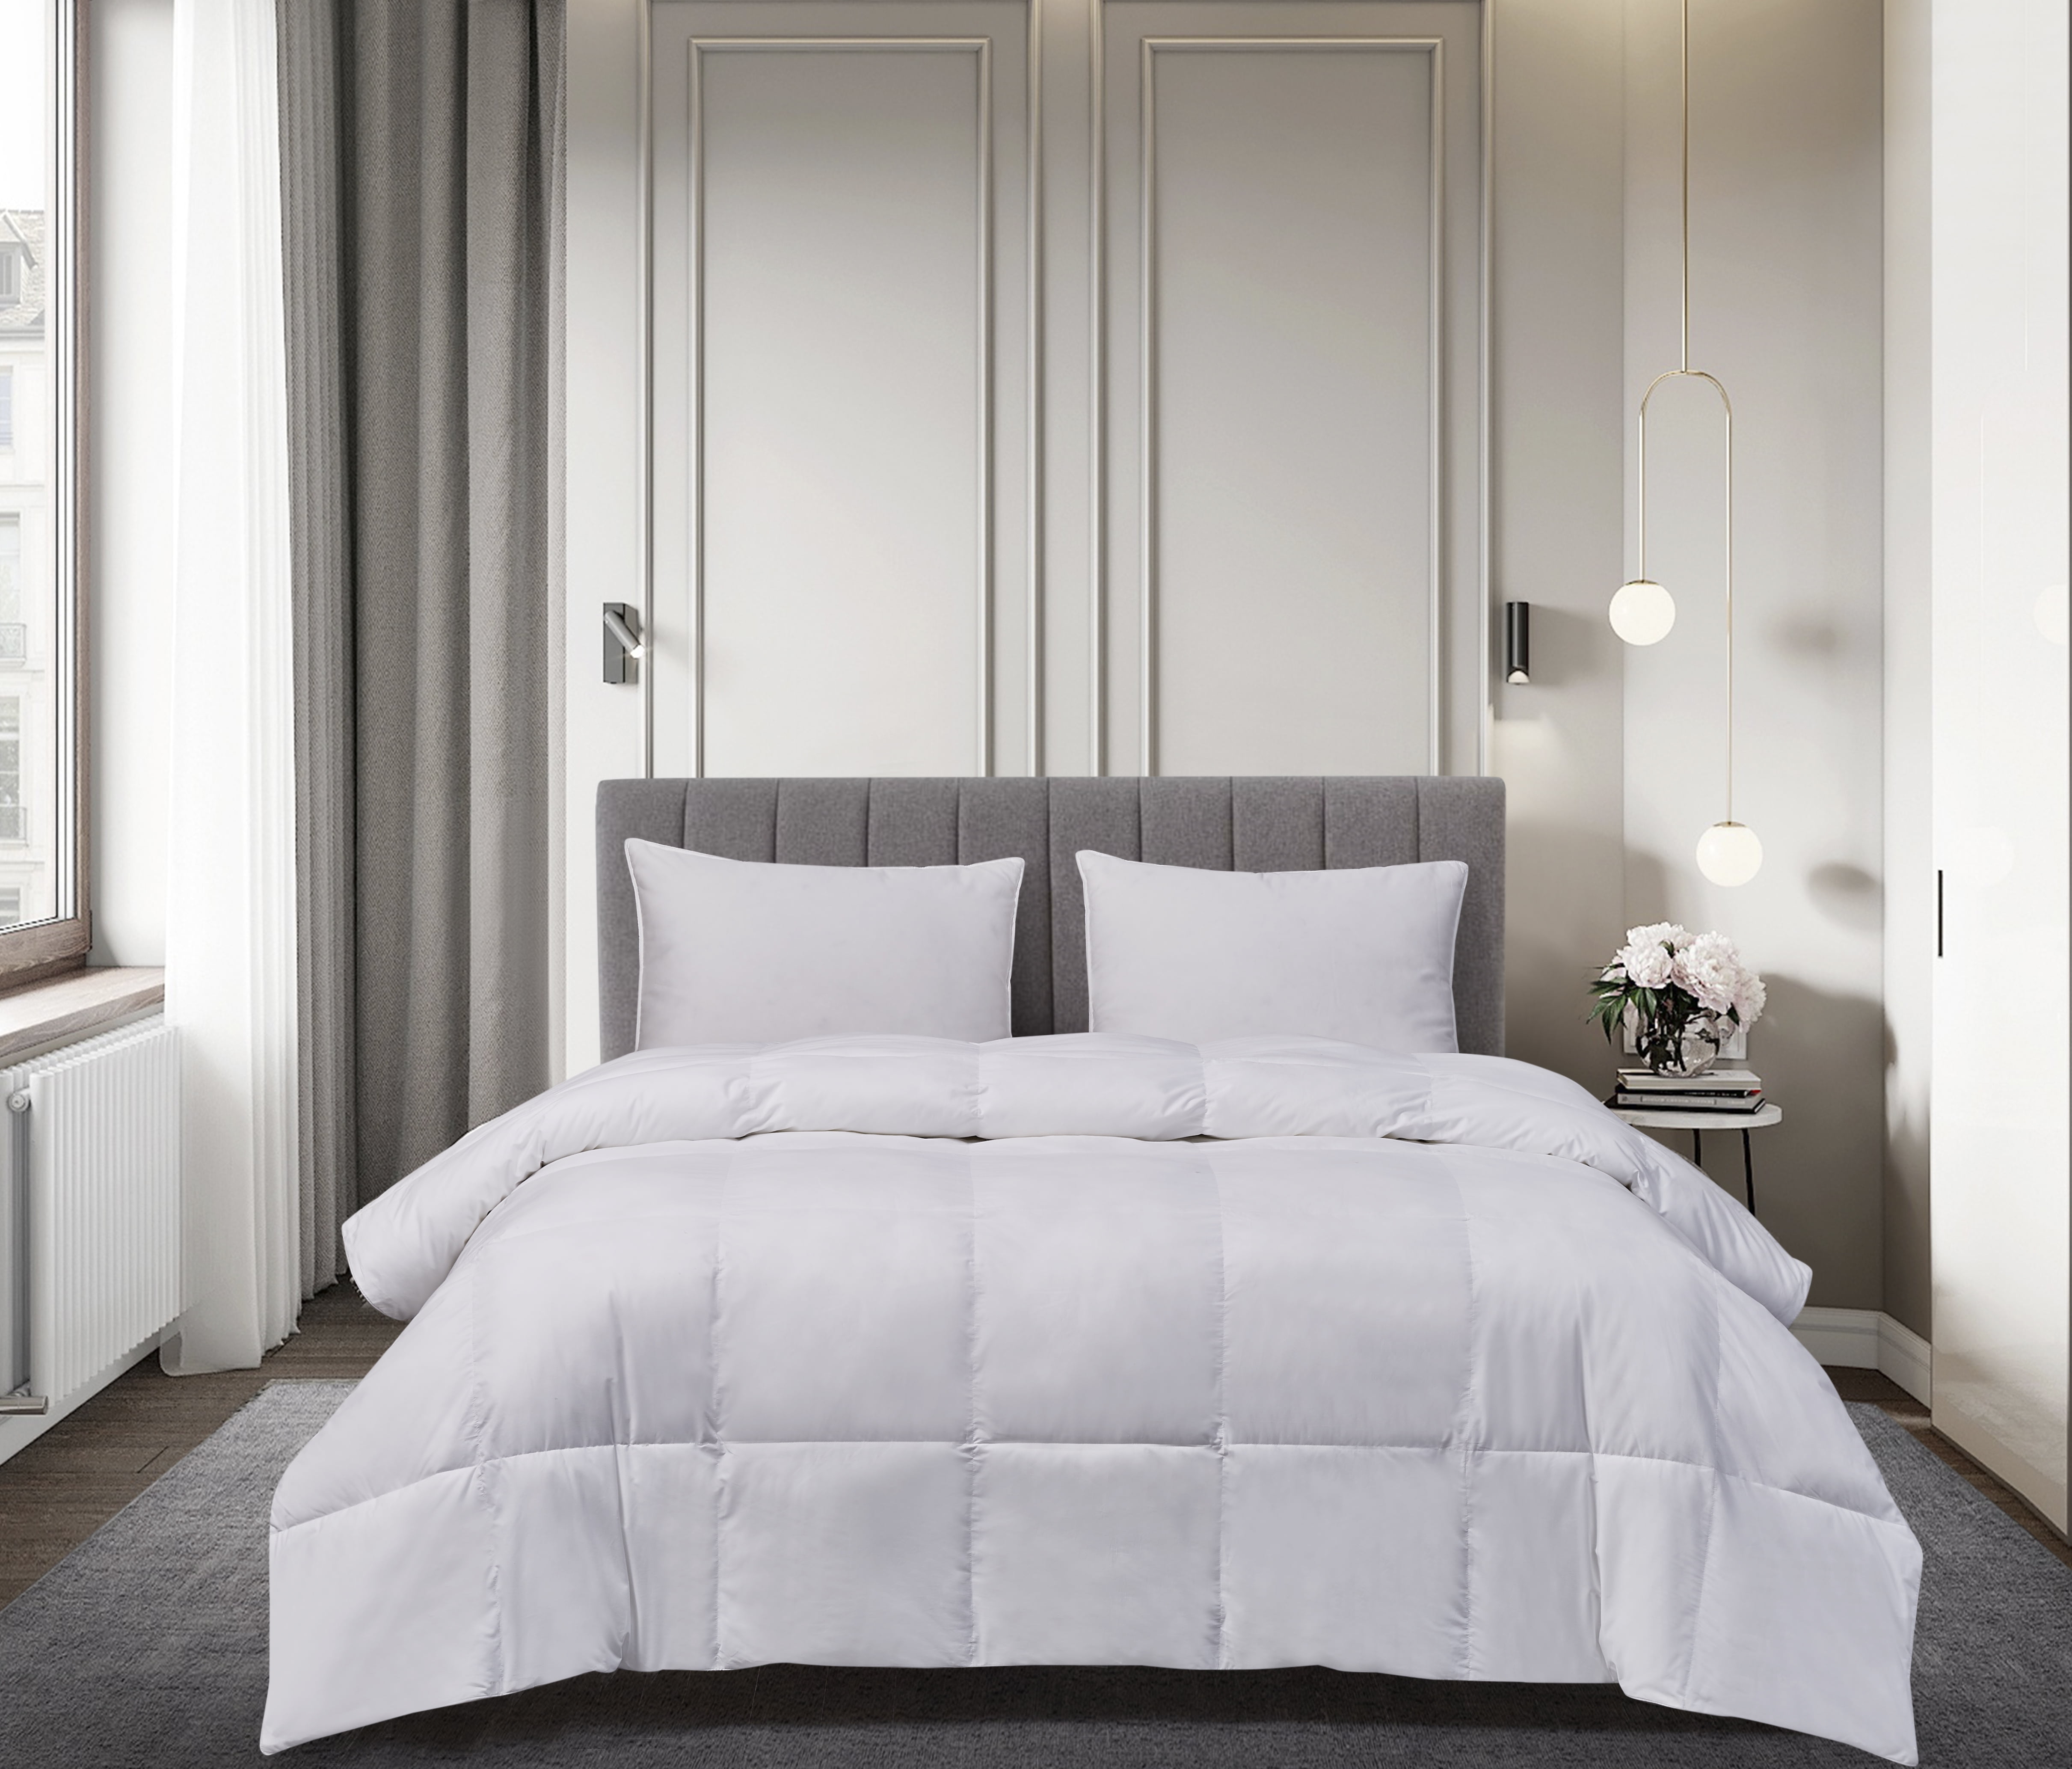 royal luxe goose down comforter